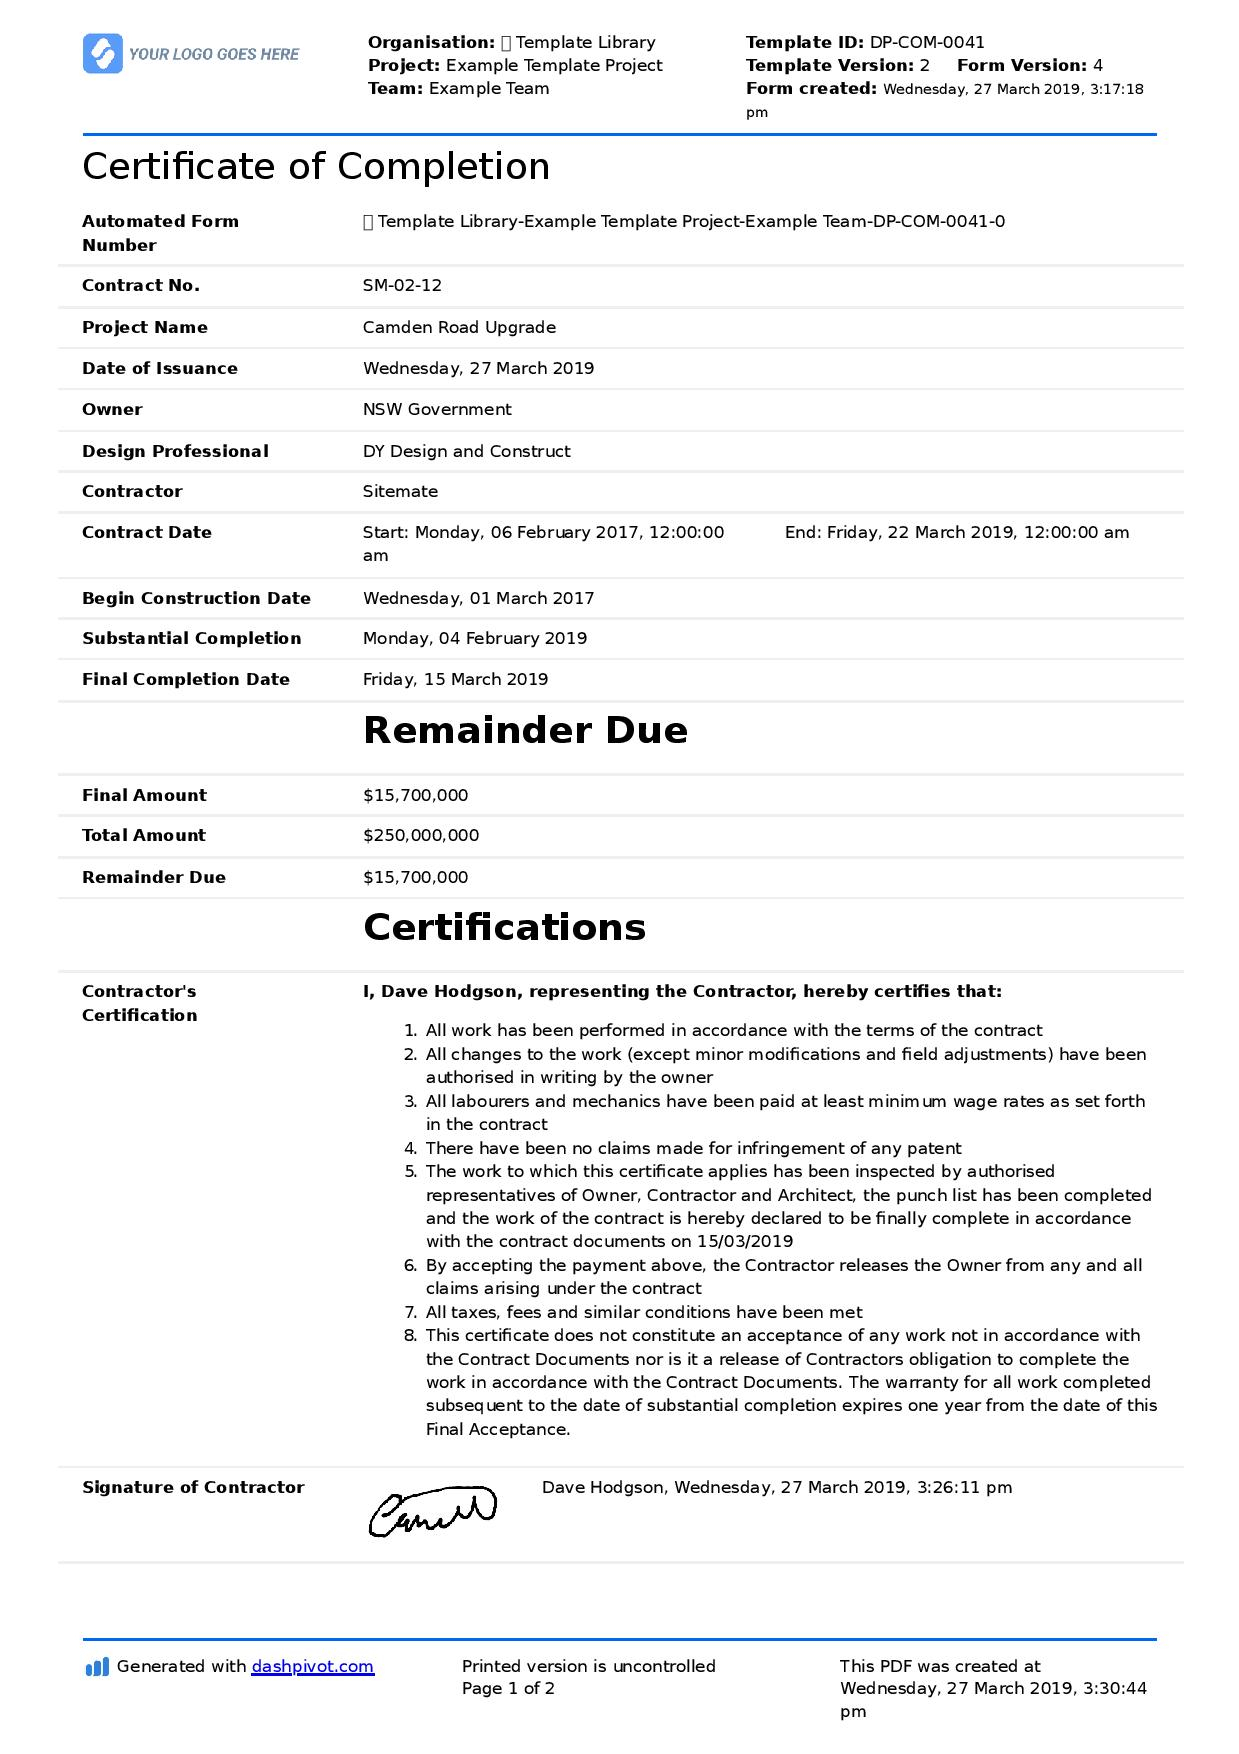 Certificate Of Completion For Construction (Free Template + Pertaining To Certificate Of Completion Construction Templates